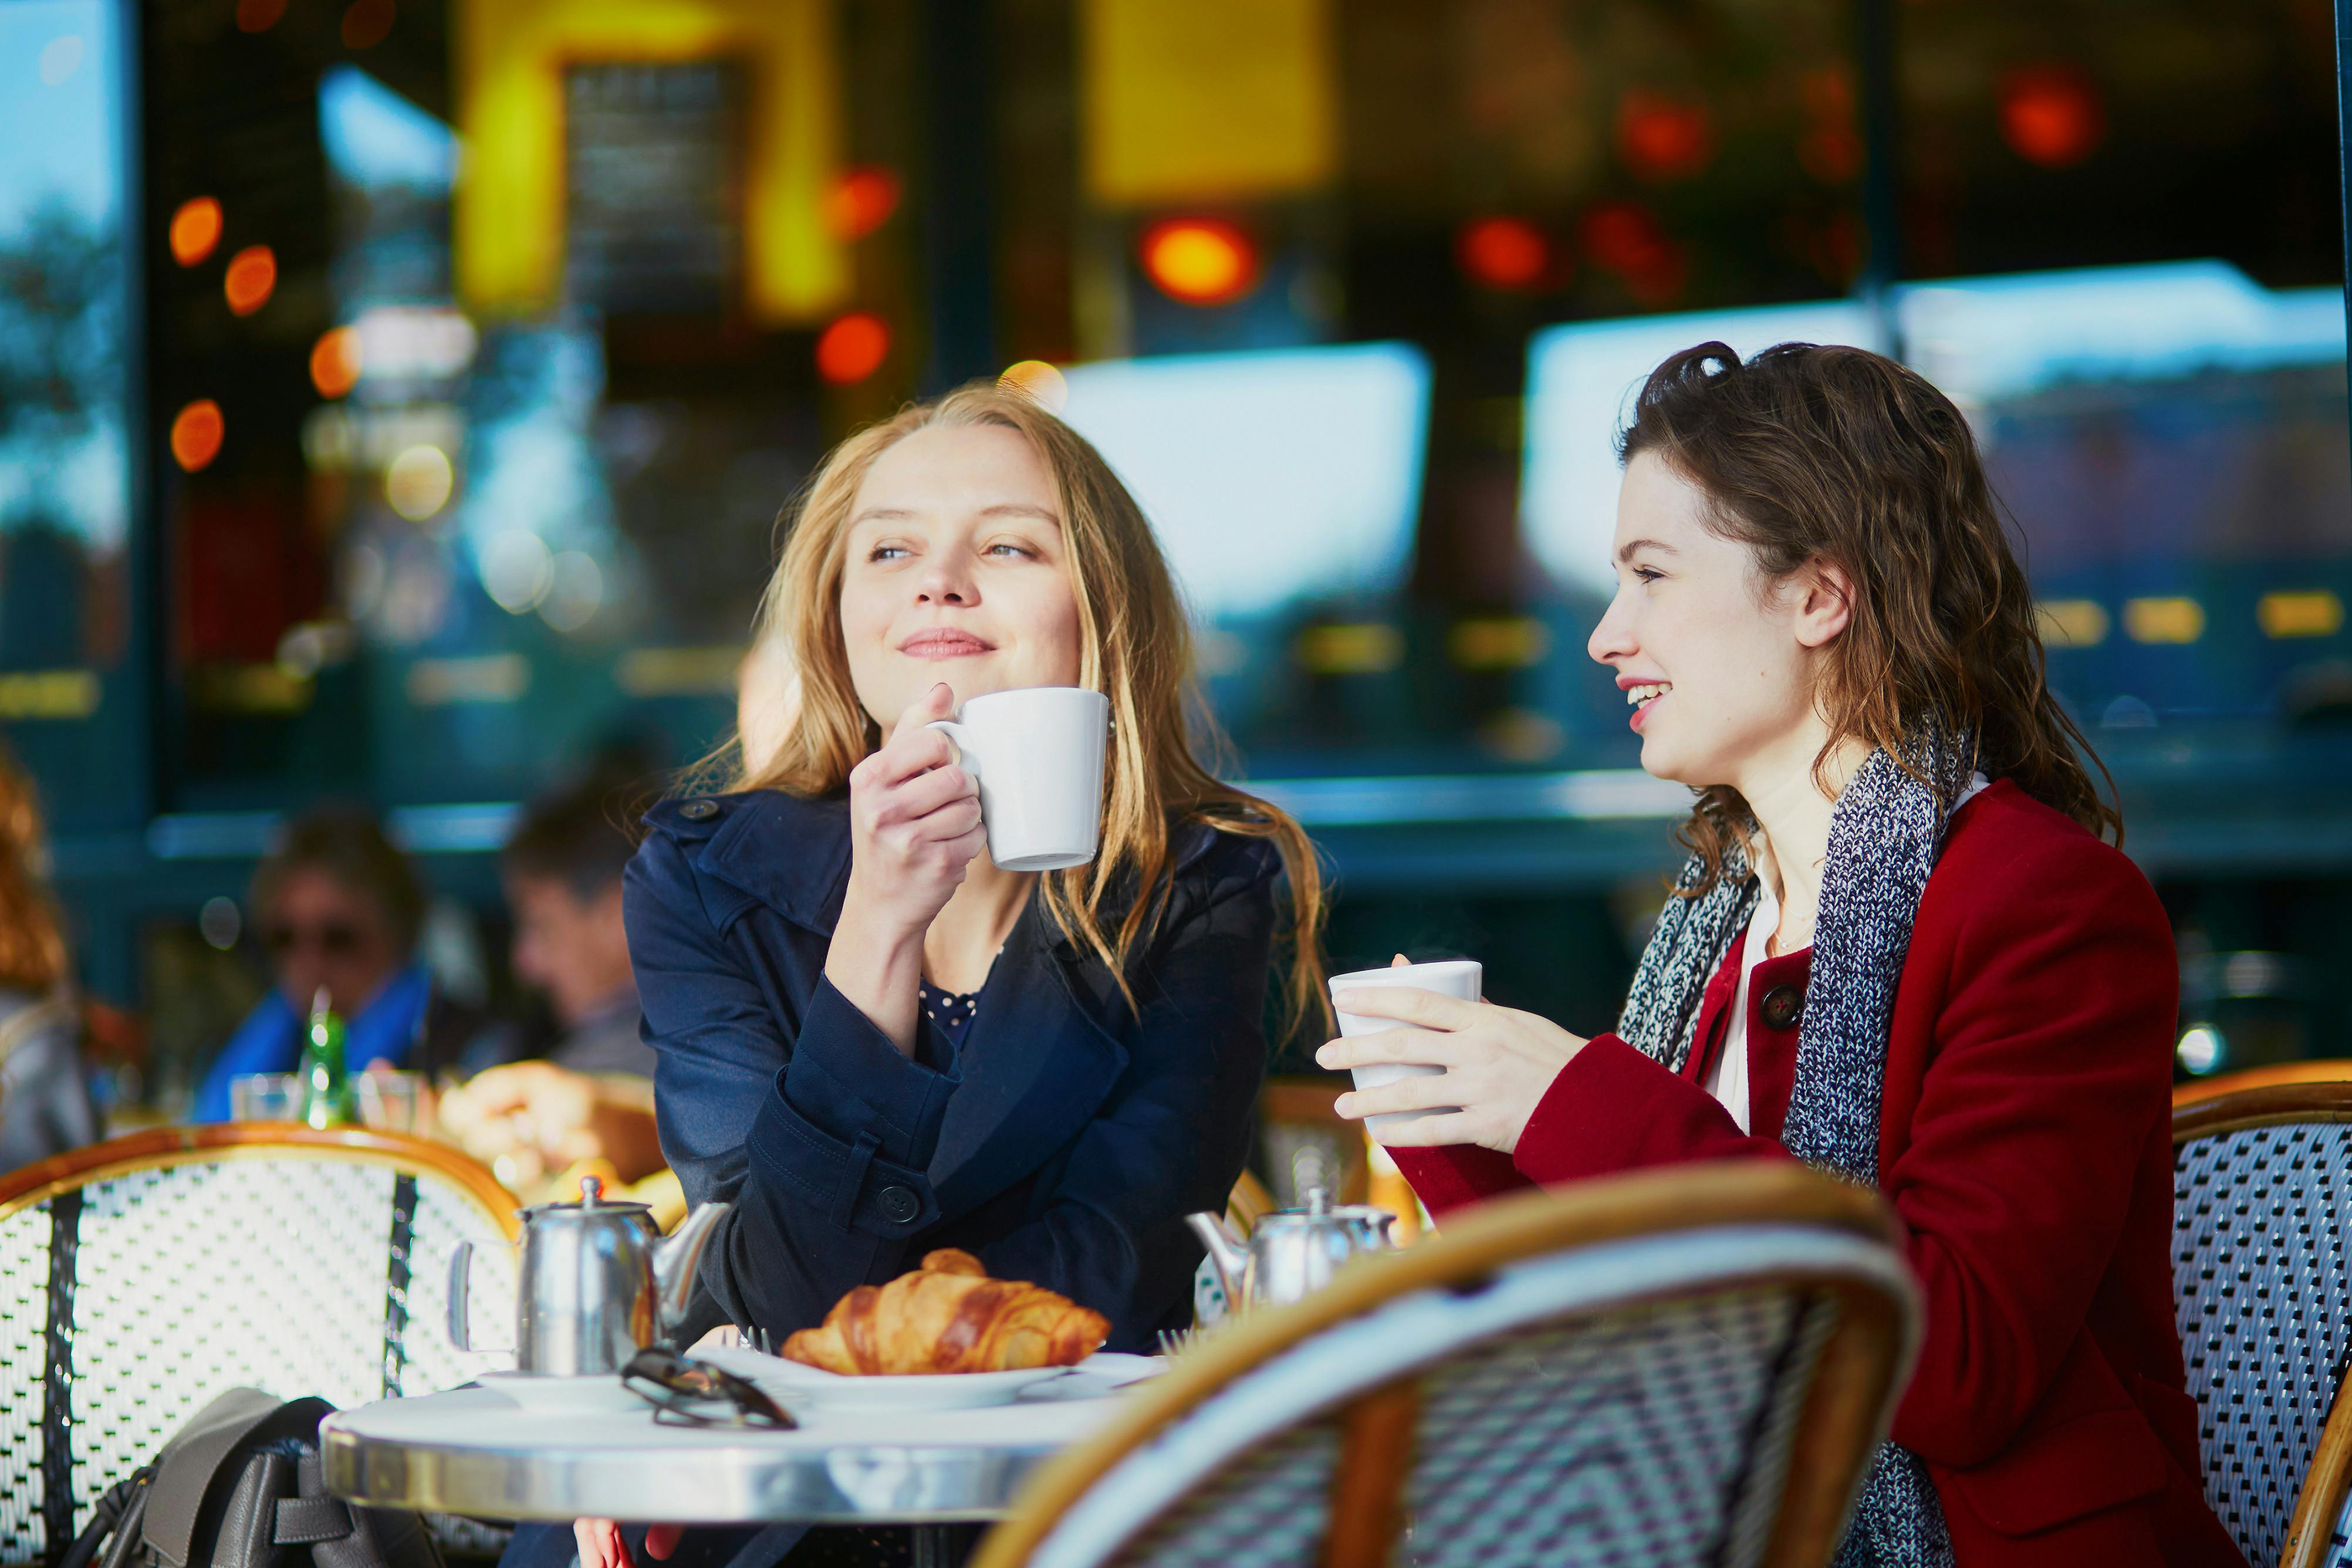 Conversation in French and Coffee at Cafe de Flore